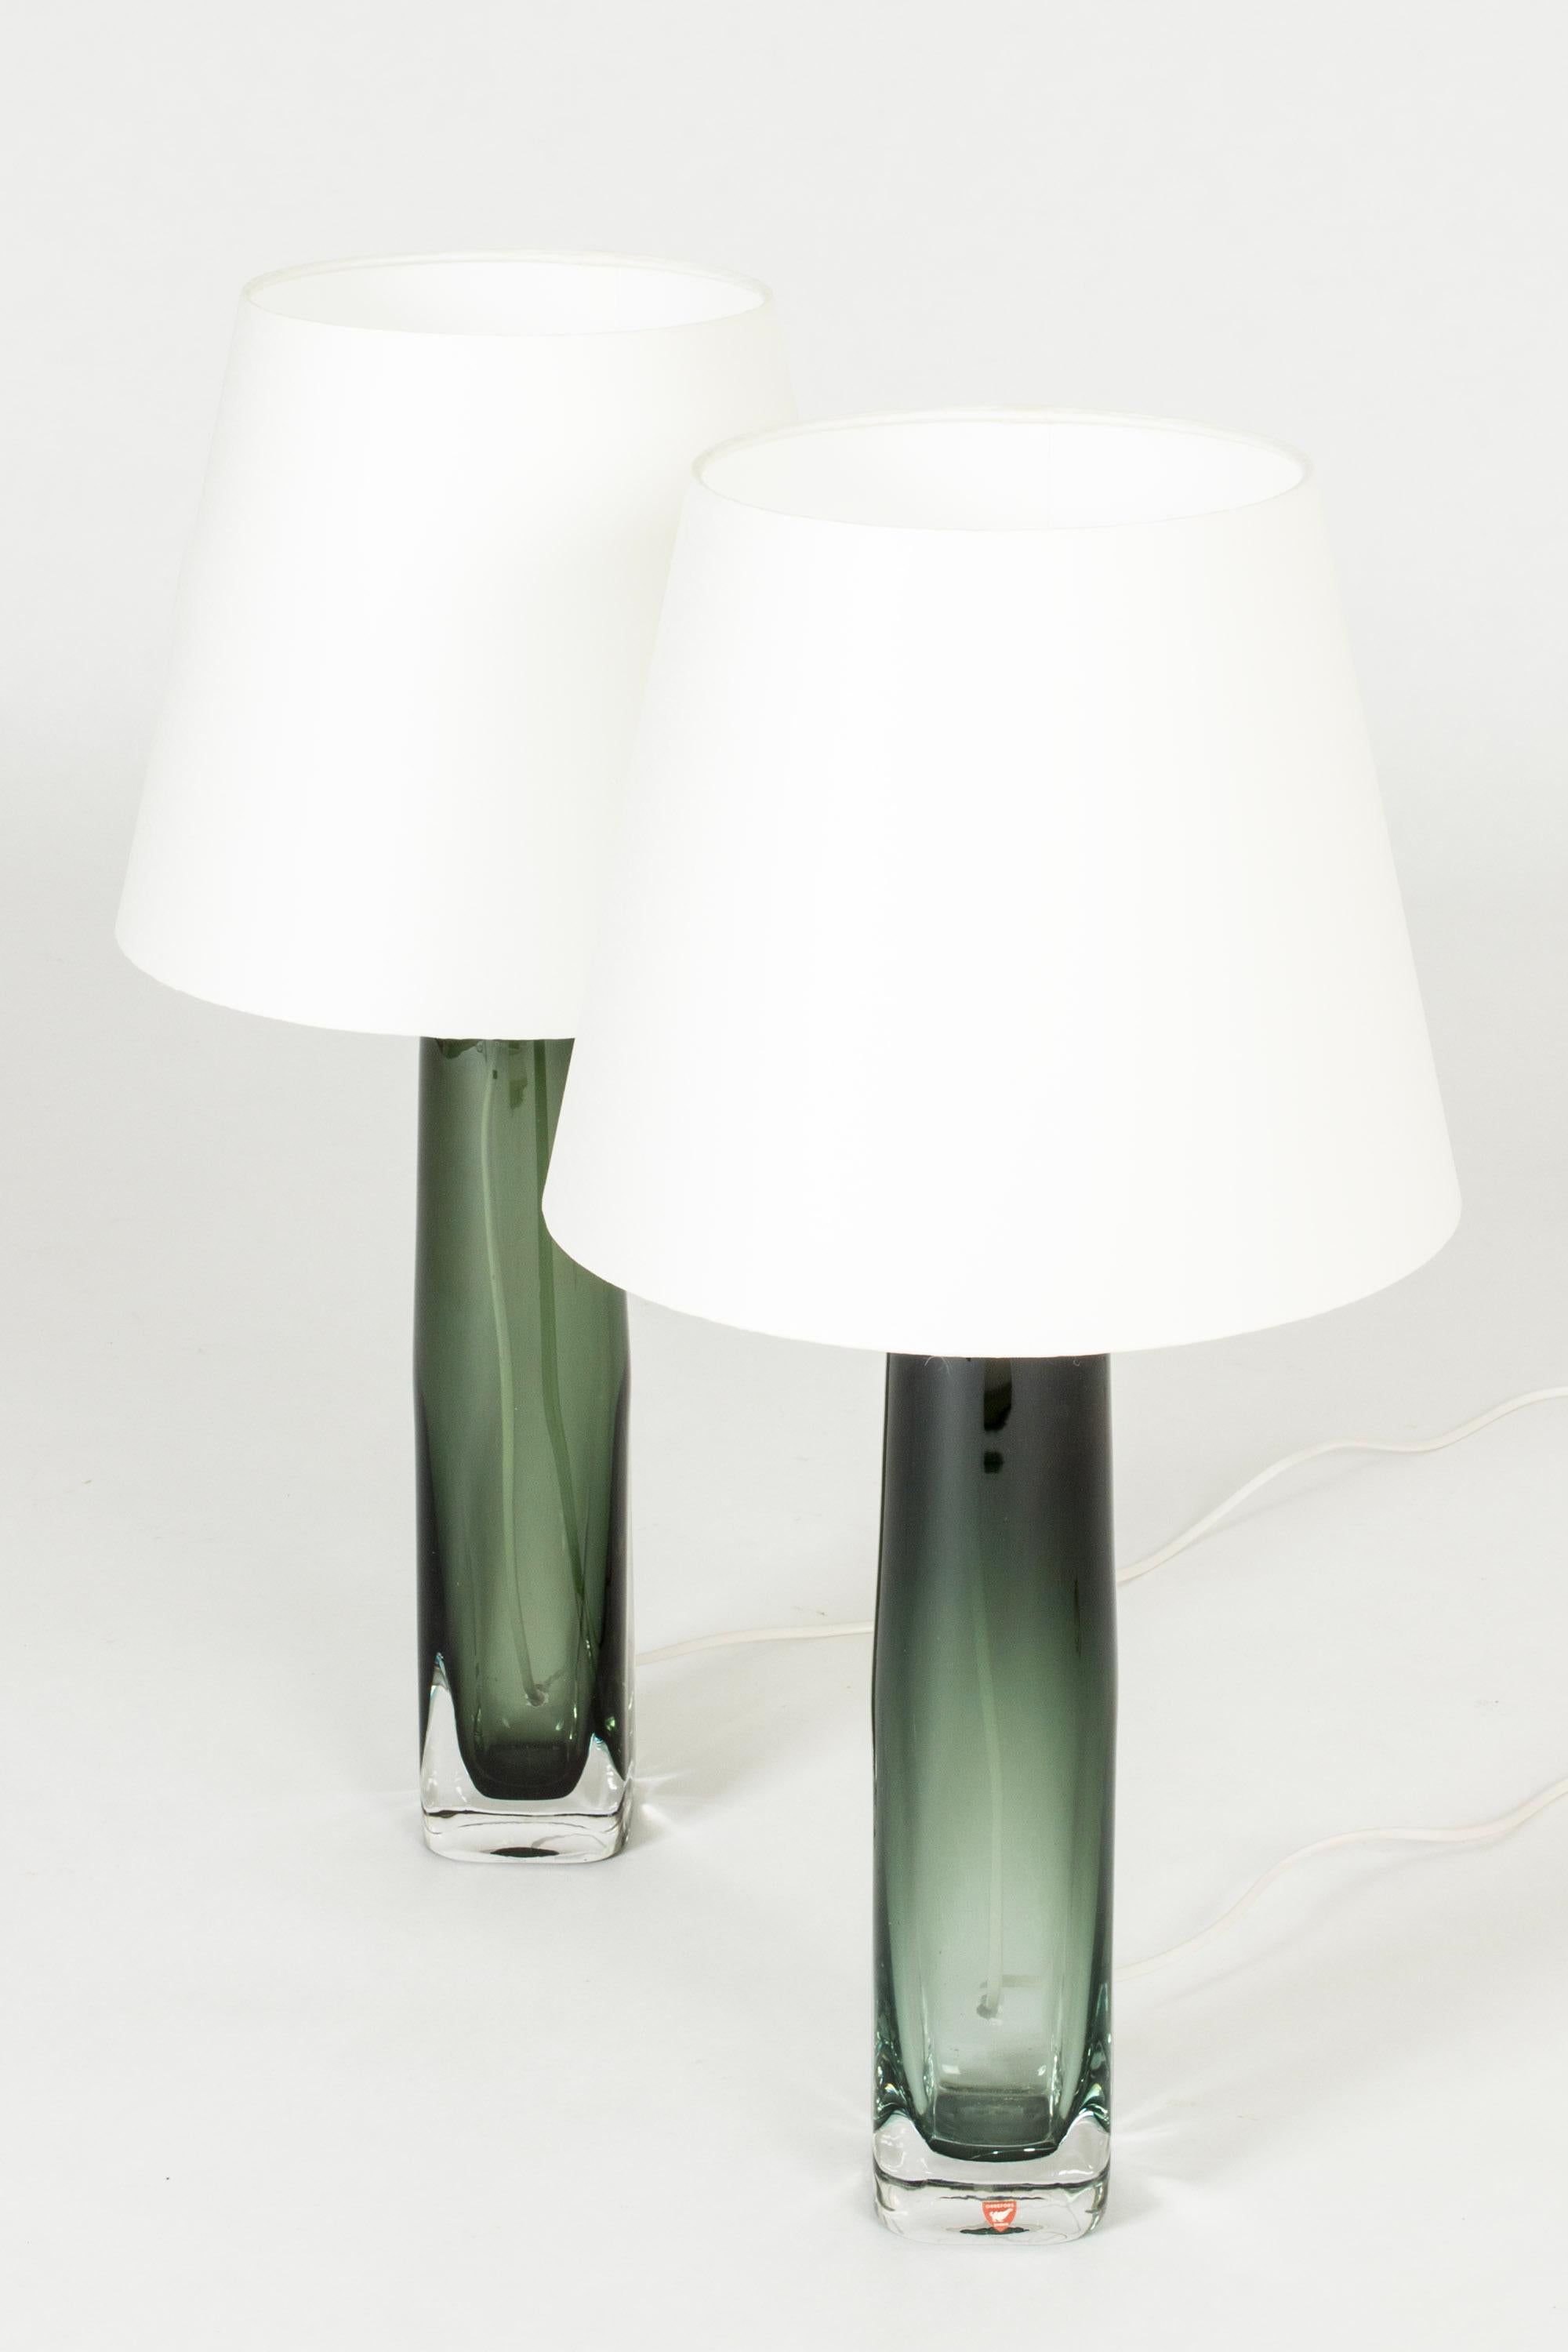 Pair of crystal glass table lamps by Carl Fagerlund, made from dark brown colored glass in a narrow conical shape, almond shaped at the base. Beautiful translucent color, elegant design.